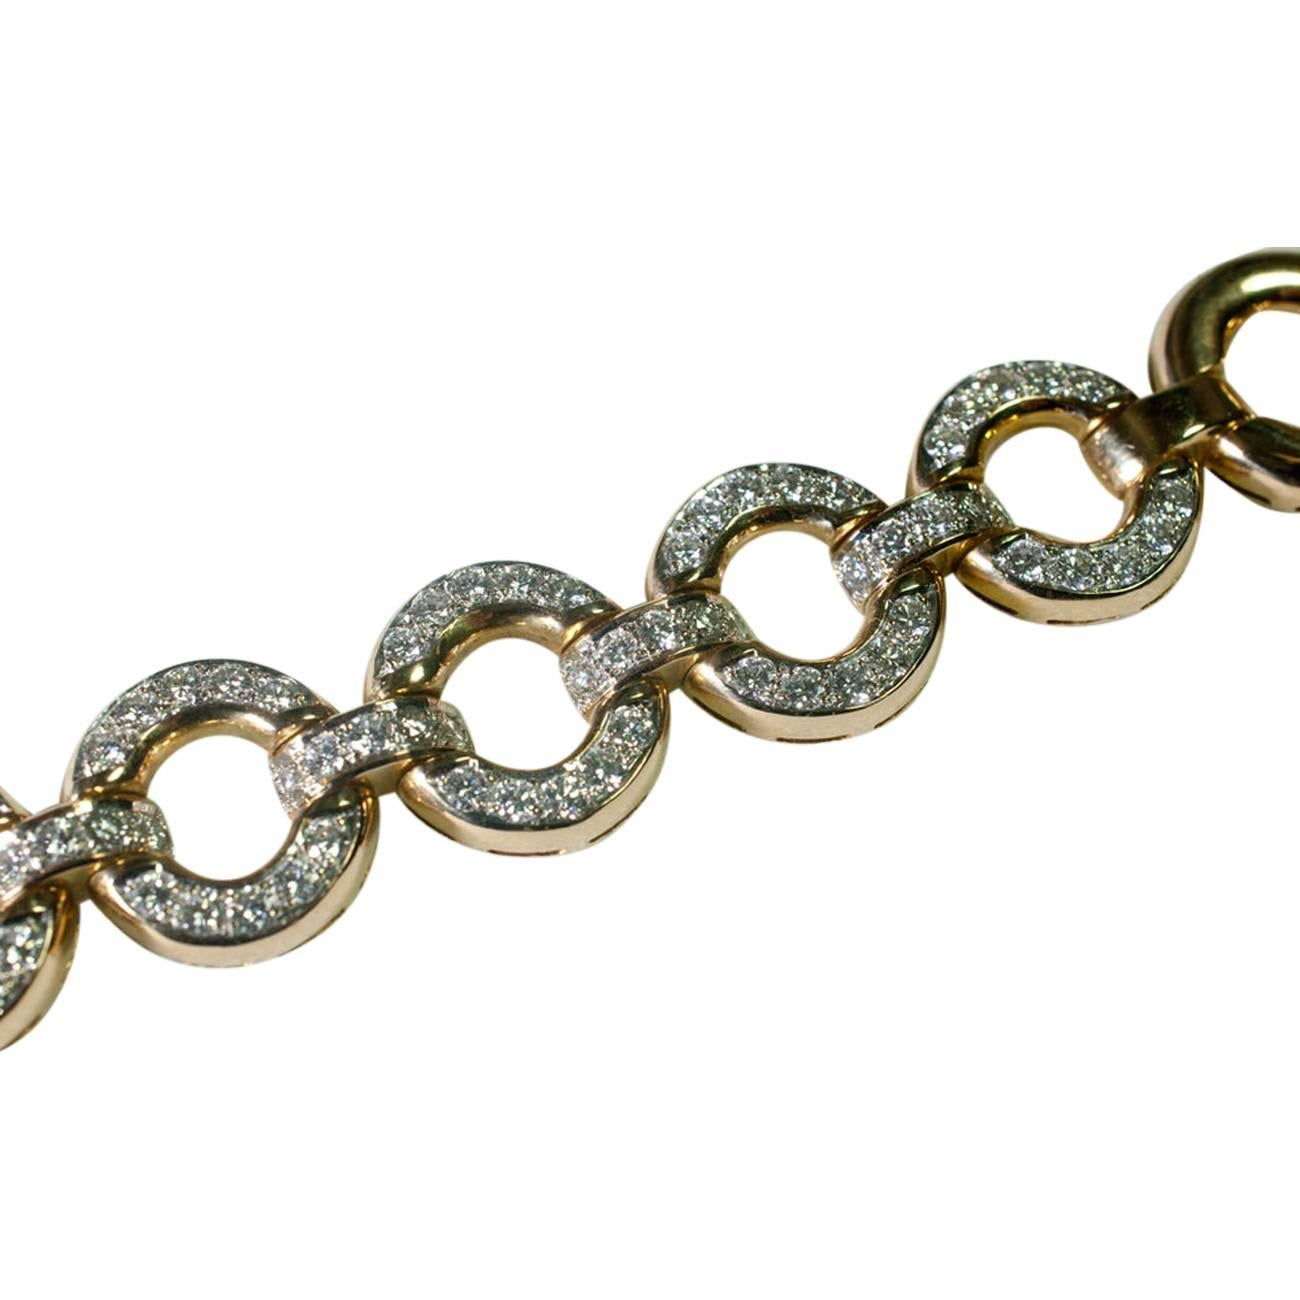 18ct gold bracelet consisting of 11 circles, 5 of which are set with brilliant cut diamonds totalling 6ct.  It is fitted with a strong clasp which clicks into the end section and has a figure-of-eight lock for added security.  Weight 56gms; length